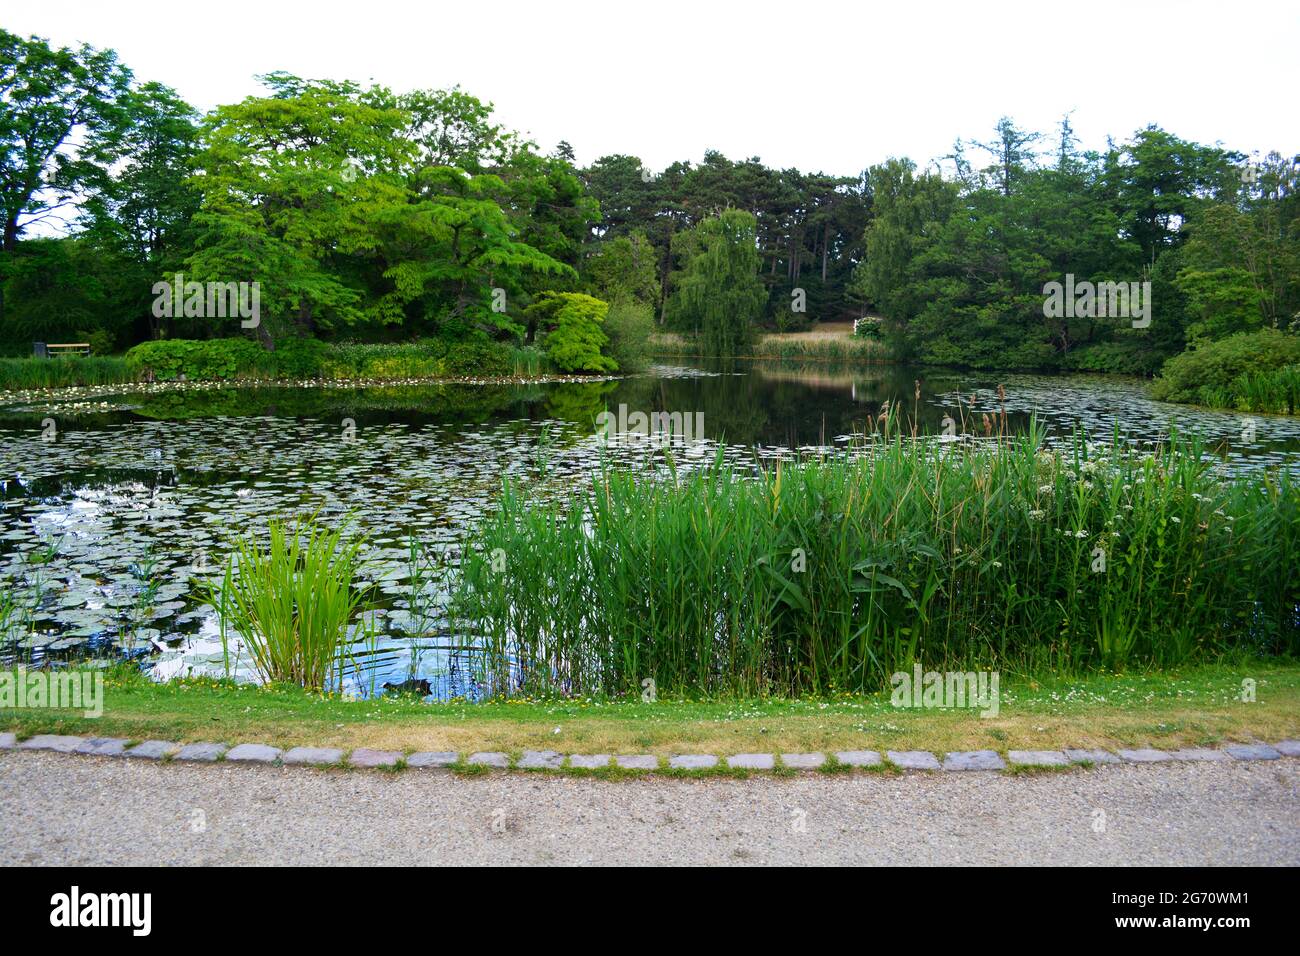 Denmark July 2021: Beautiful nature, trees and plants at the open area of The University of Copenhagen Botanical Garden Stock Photo - Alamy